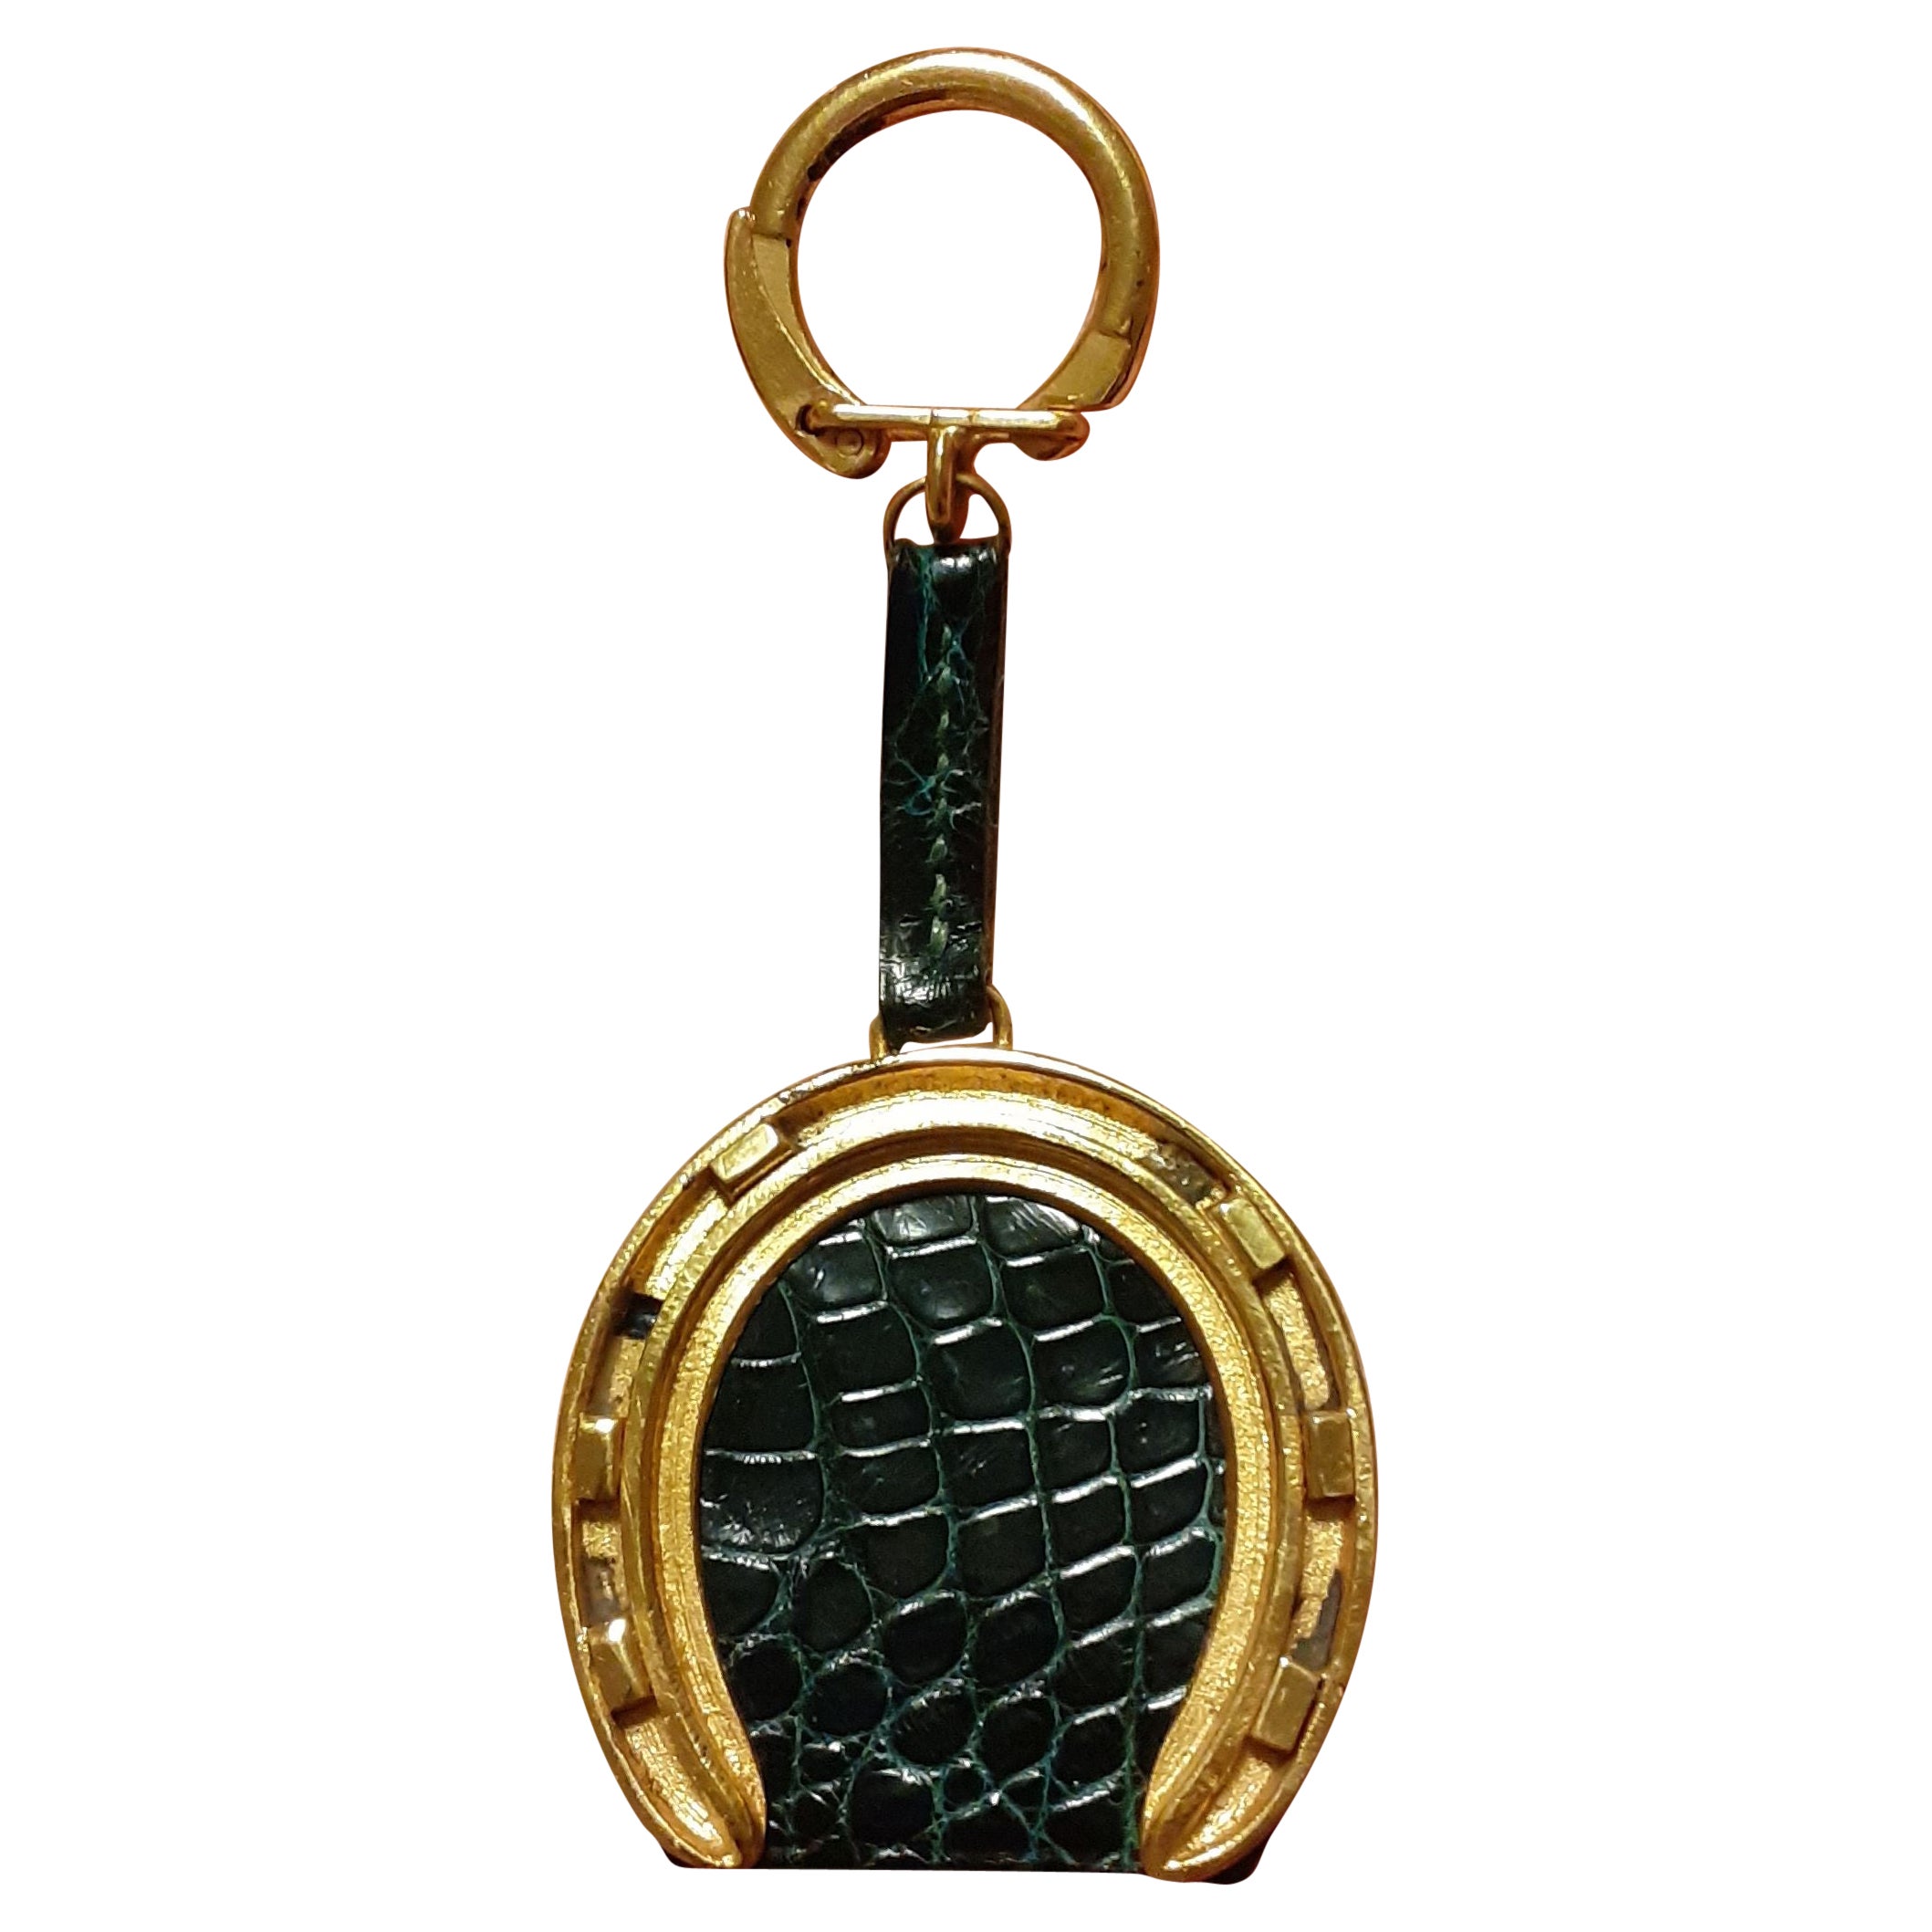 Rare Authentic Hermès Key Ring

Please choose seller shipping for this item

Can be used as key holder or bag charm

In shape of a Horseshoe

Horseshoe is a lucky charm symbol of luck, good fortune, success in business, professional achievement,